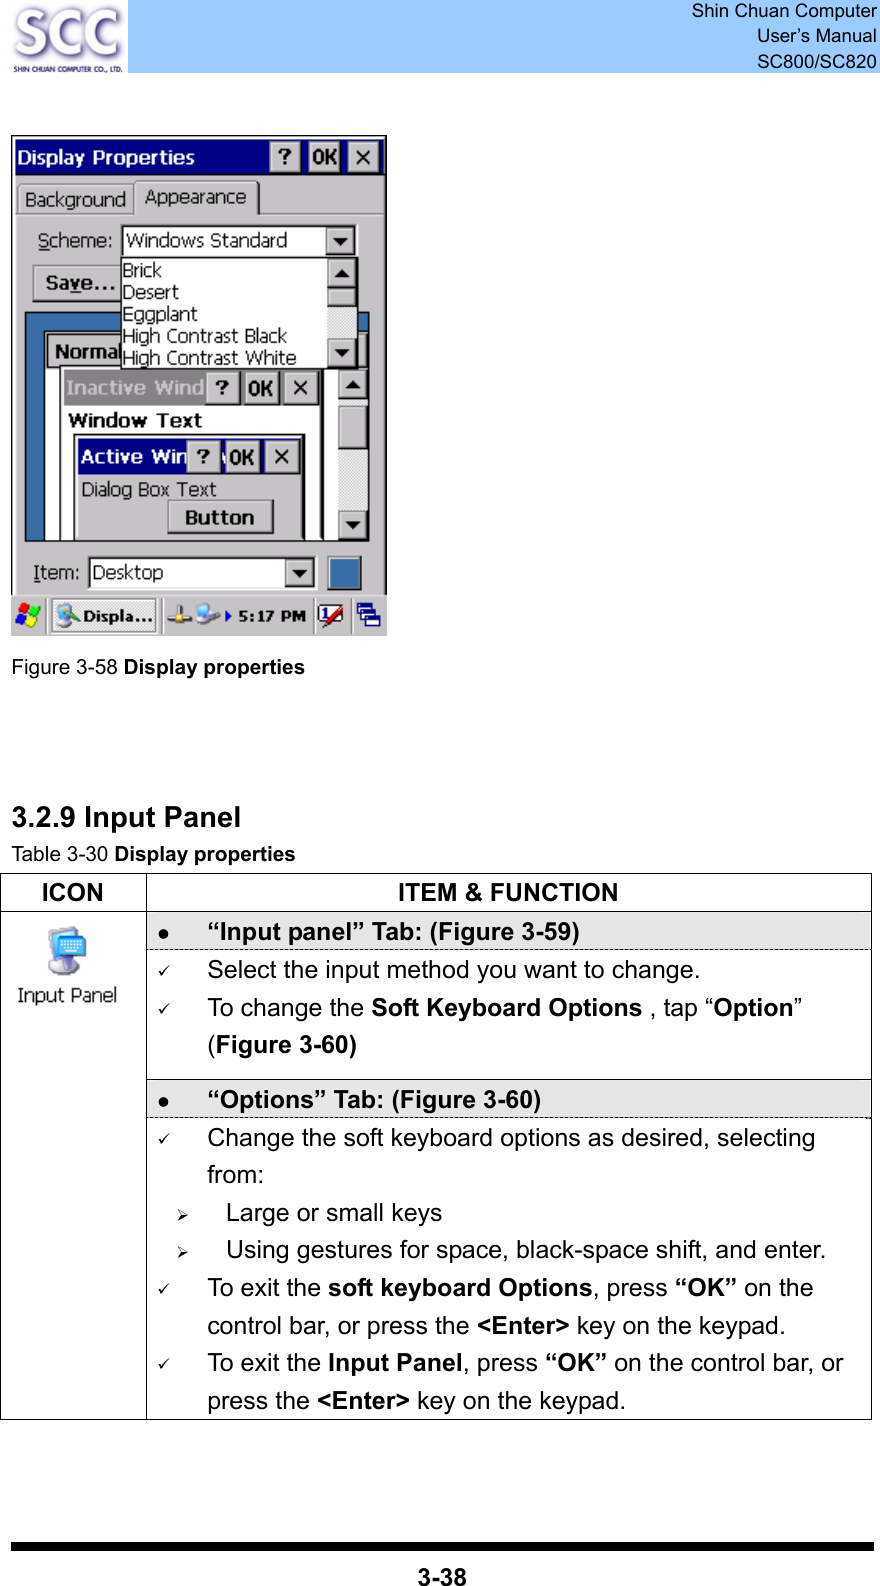  Shin Chuan Computer User’s Manual SC800/SC820  3-38    Figure 3-58 Display properties     3.2.9 Input Panel Table 3-30 Display properties ICON  ITEM &amp; FUNCTION z “Input panel” Tab: (Figure 3-59) 9 Select the input method you want to change. 9 To change the Soft Keyboard Options , tap “Option” (Figure 3-60) z “Options” Tab: (Figure 3-60)  9 Change the soft keyboard options as desired, selecting from: ¾ Large or small keys ¾ Using gestures for space, black-space shift, and enter. 9 To exit the soft keyboard Options, press “OK” on the control bar, or press the &lt;Enter&gt; key on the keypad. 9 To exit the Input Panel, press “OK” on the control bar, or press the &lt;Enter&gt; key on the keypad.   